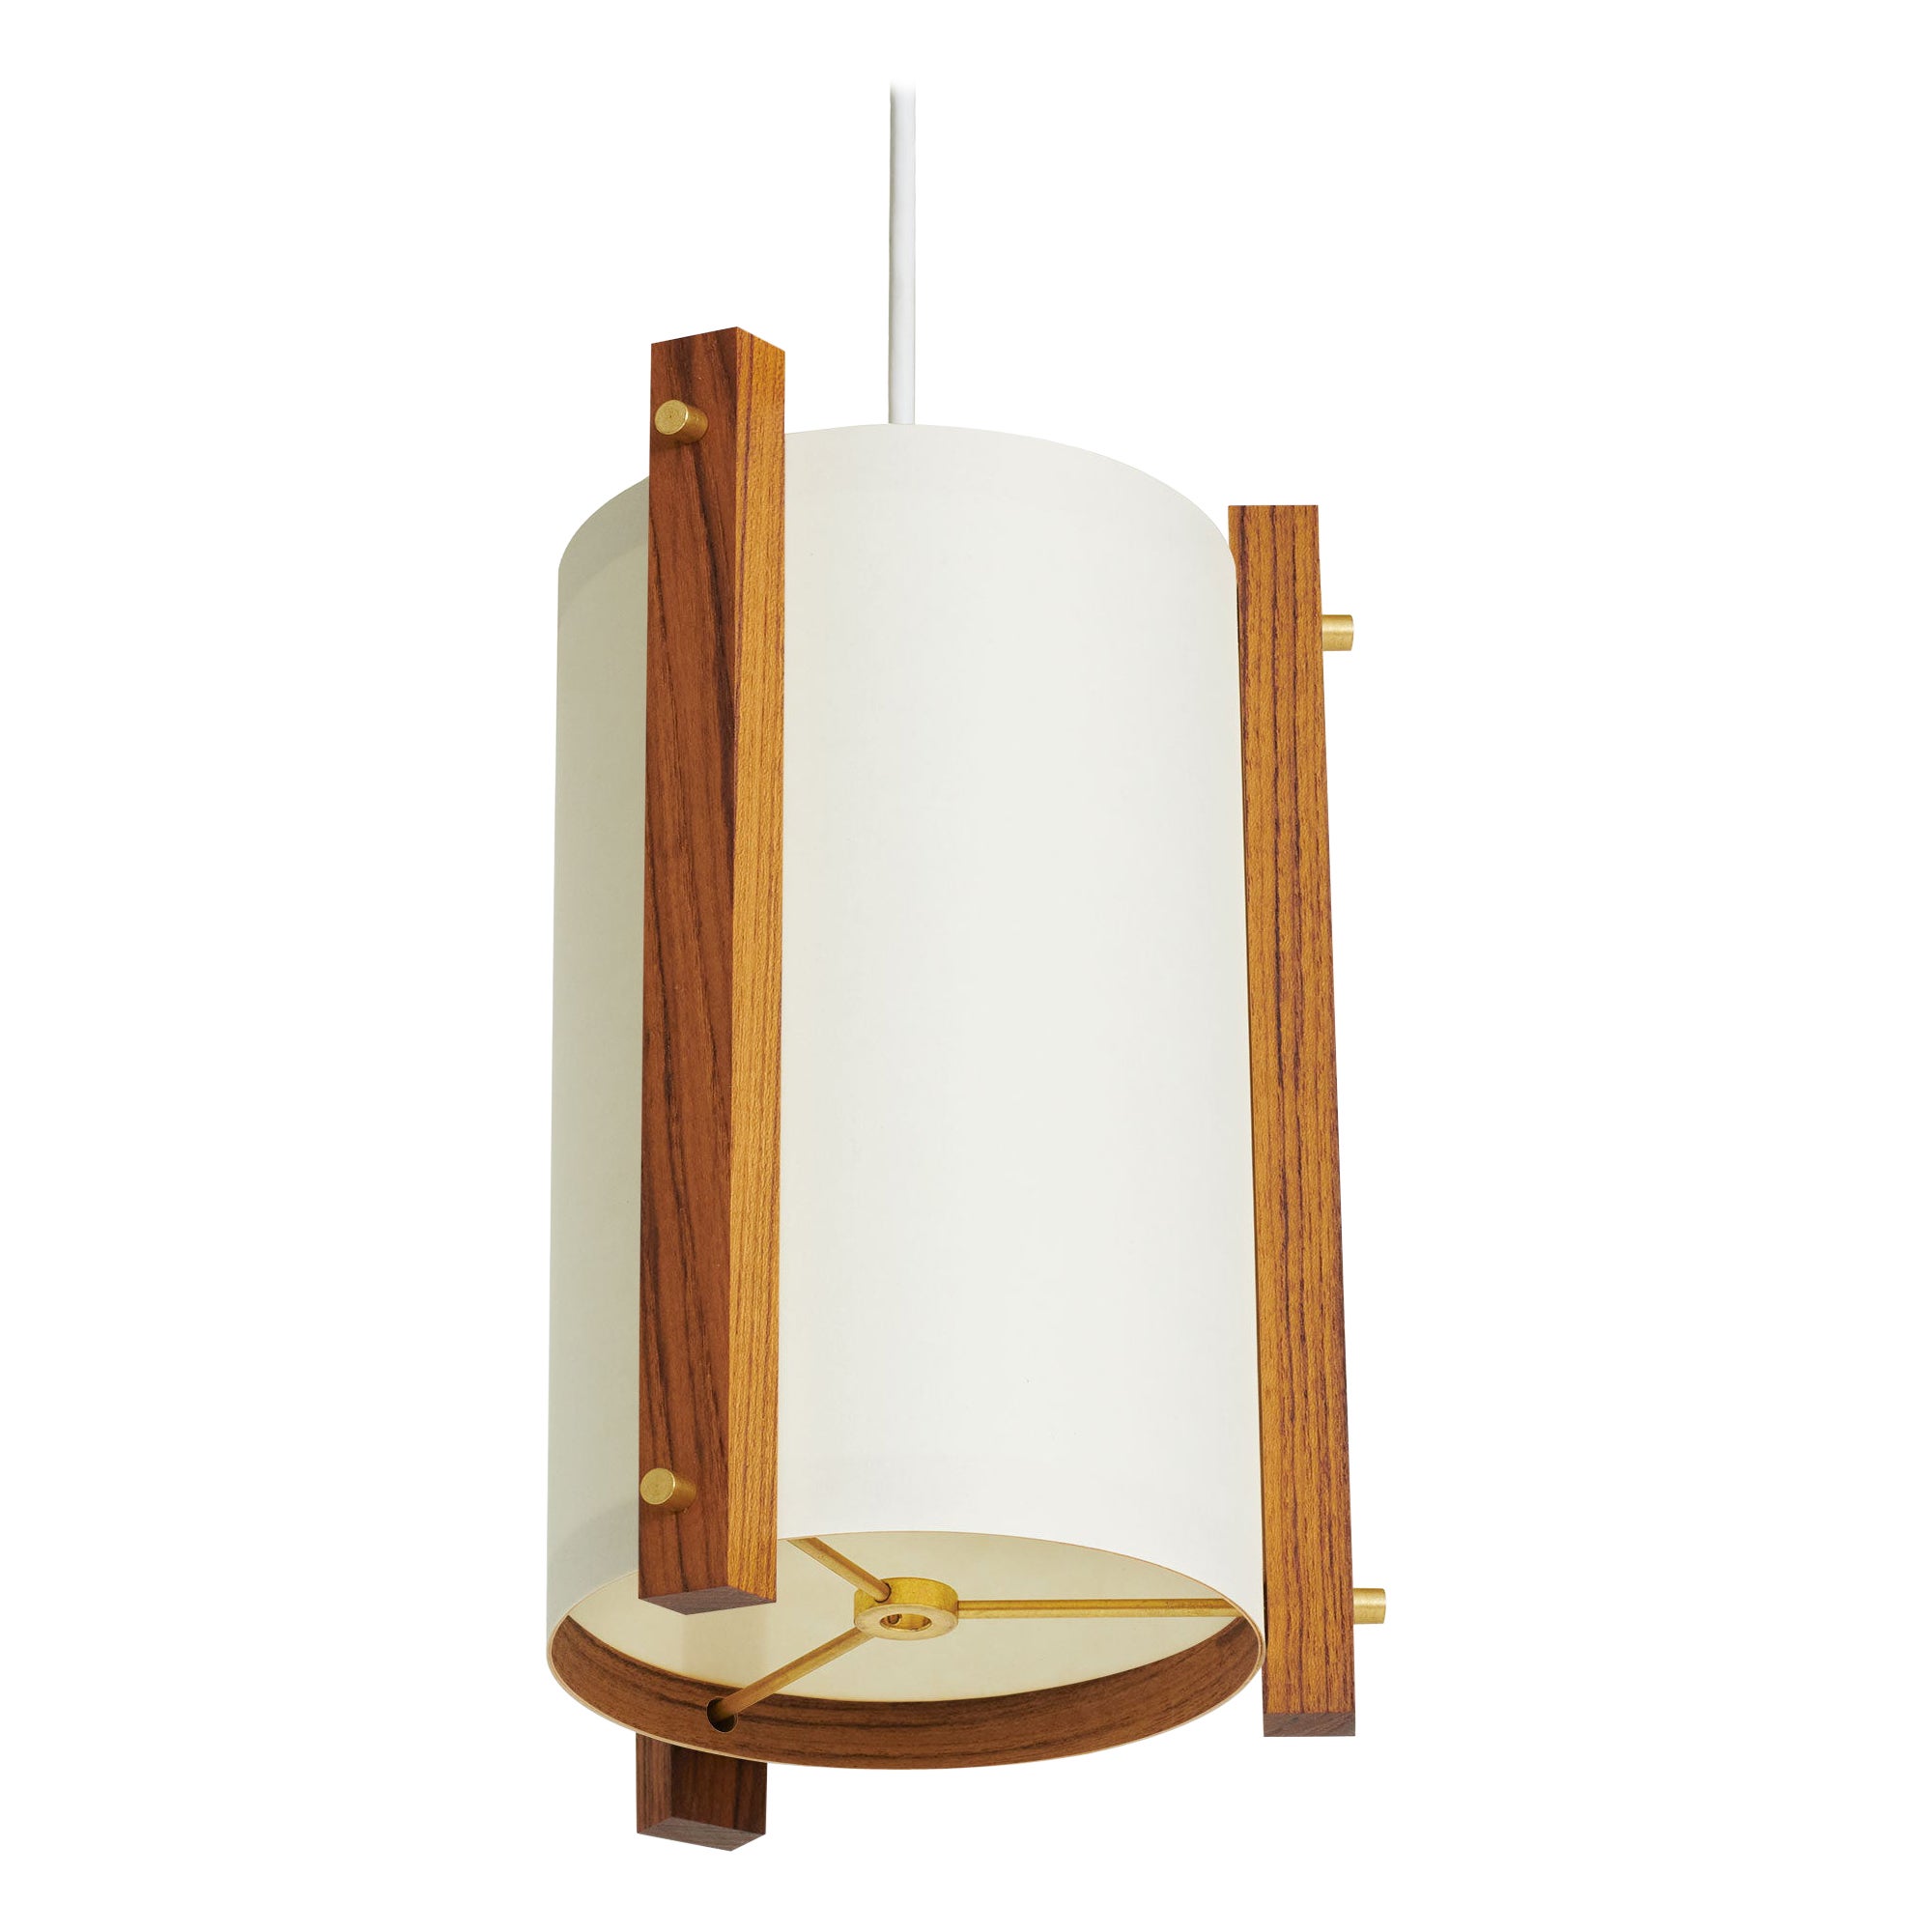 Japanese inspired mid-century white Teak and Brass Pendant Lamp - small For Sale